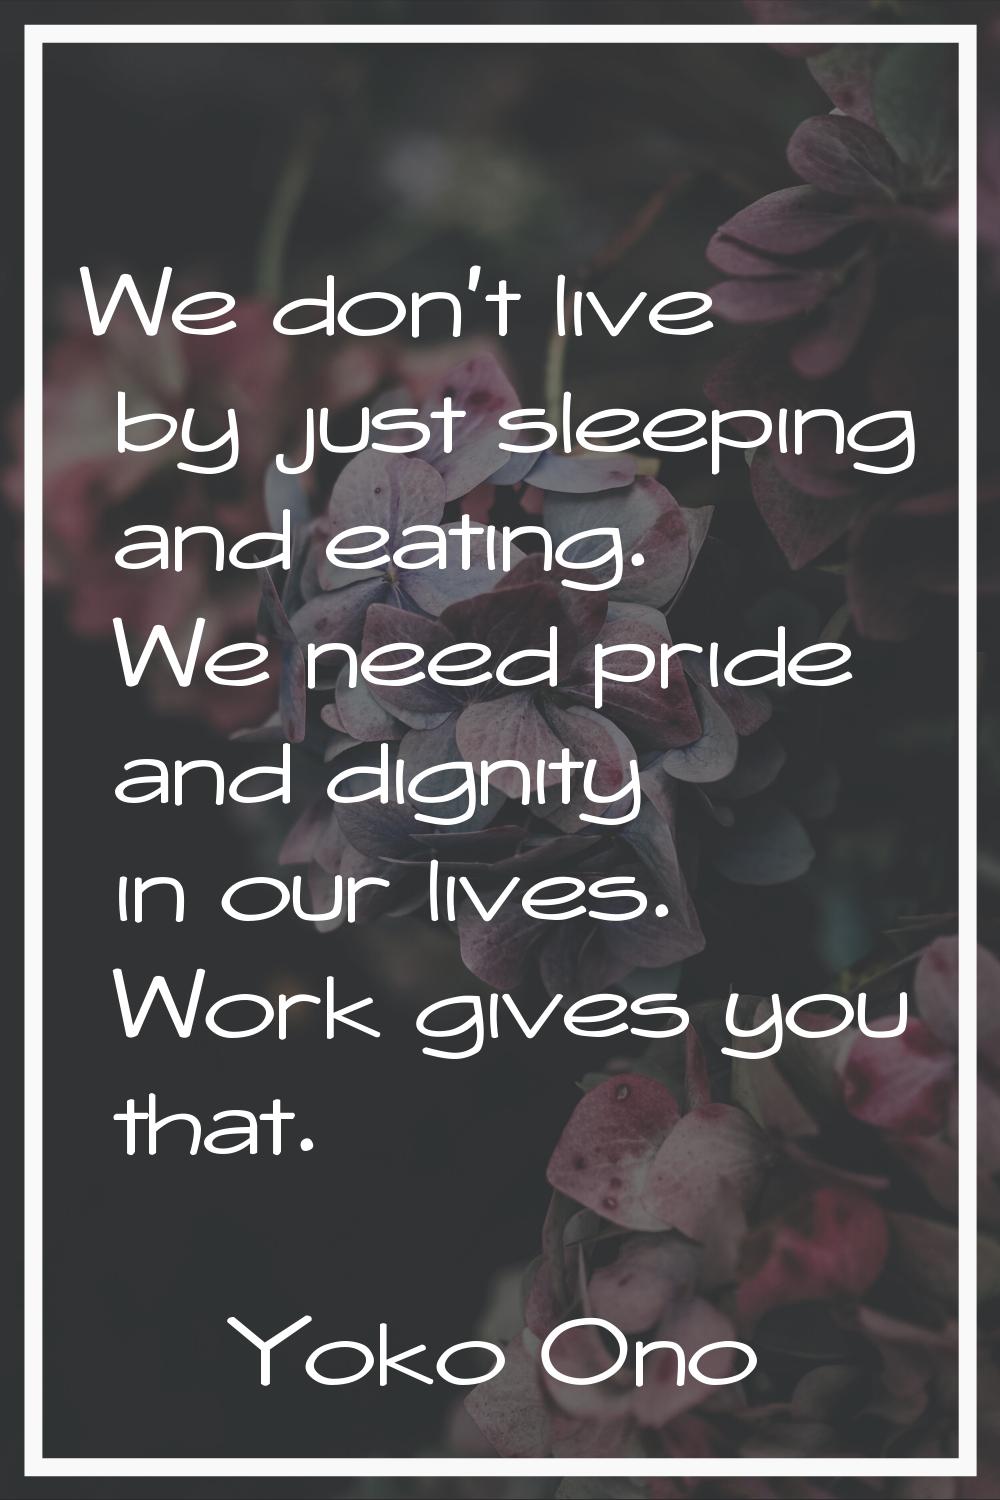 We don't live by just sleeping and eating. We need pride and dignity in our lives. Work gives you t